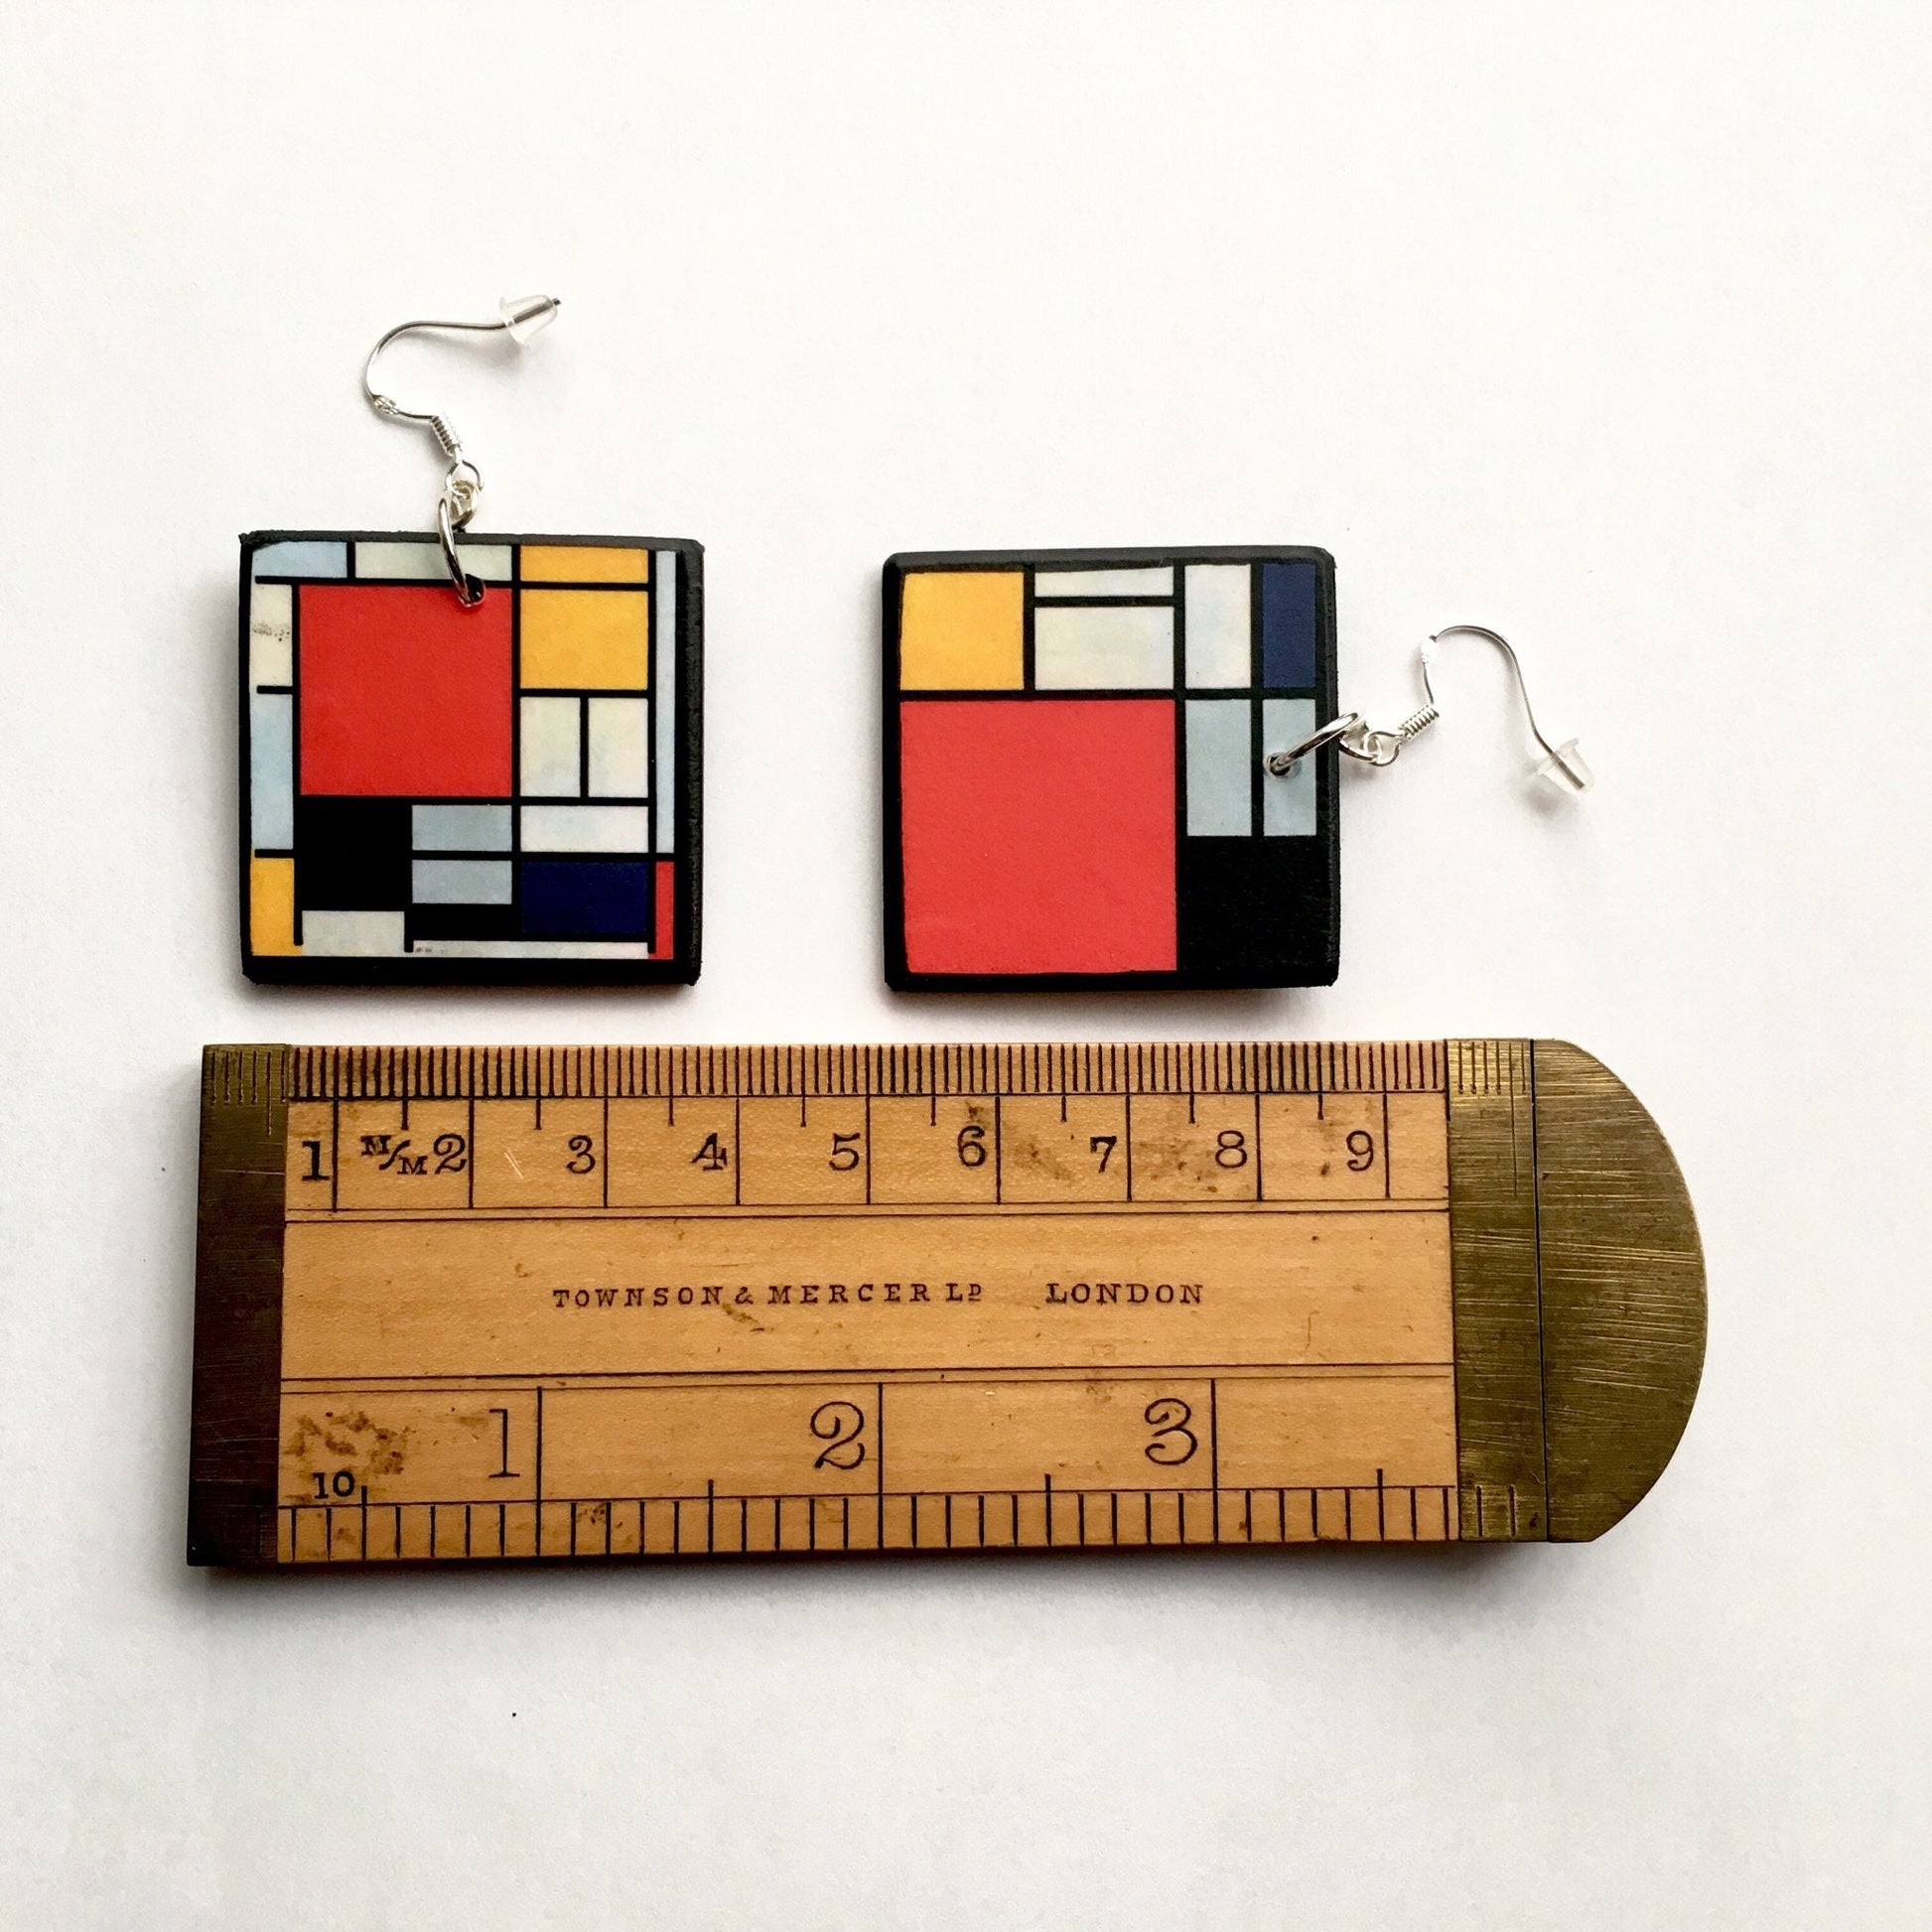 Mondrian inspired earrings are wearable art earrings handmade by Obljewellery. Primary colours, blue, yellow and red are used in abstract, geometric shapes.